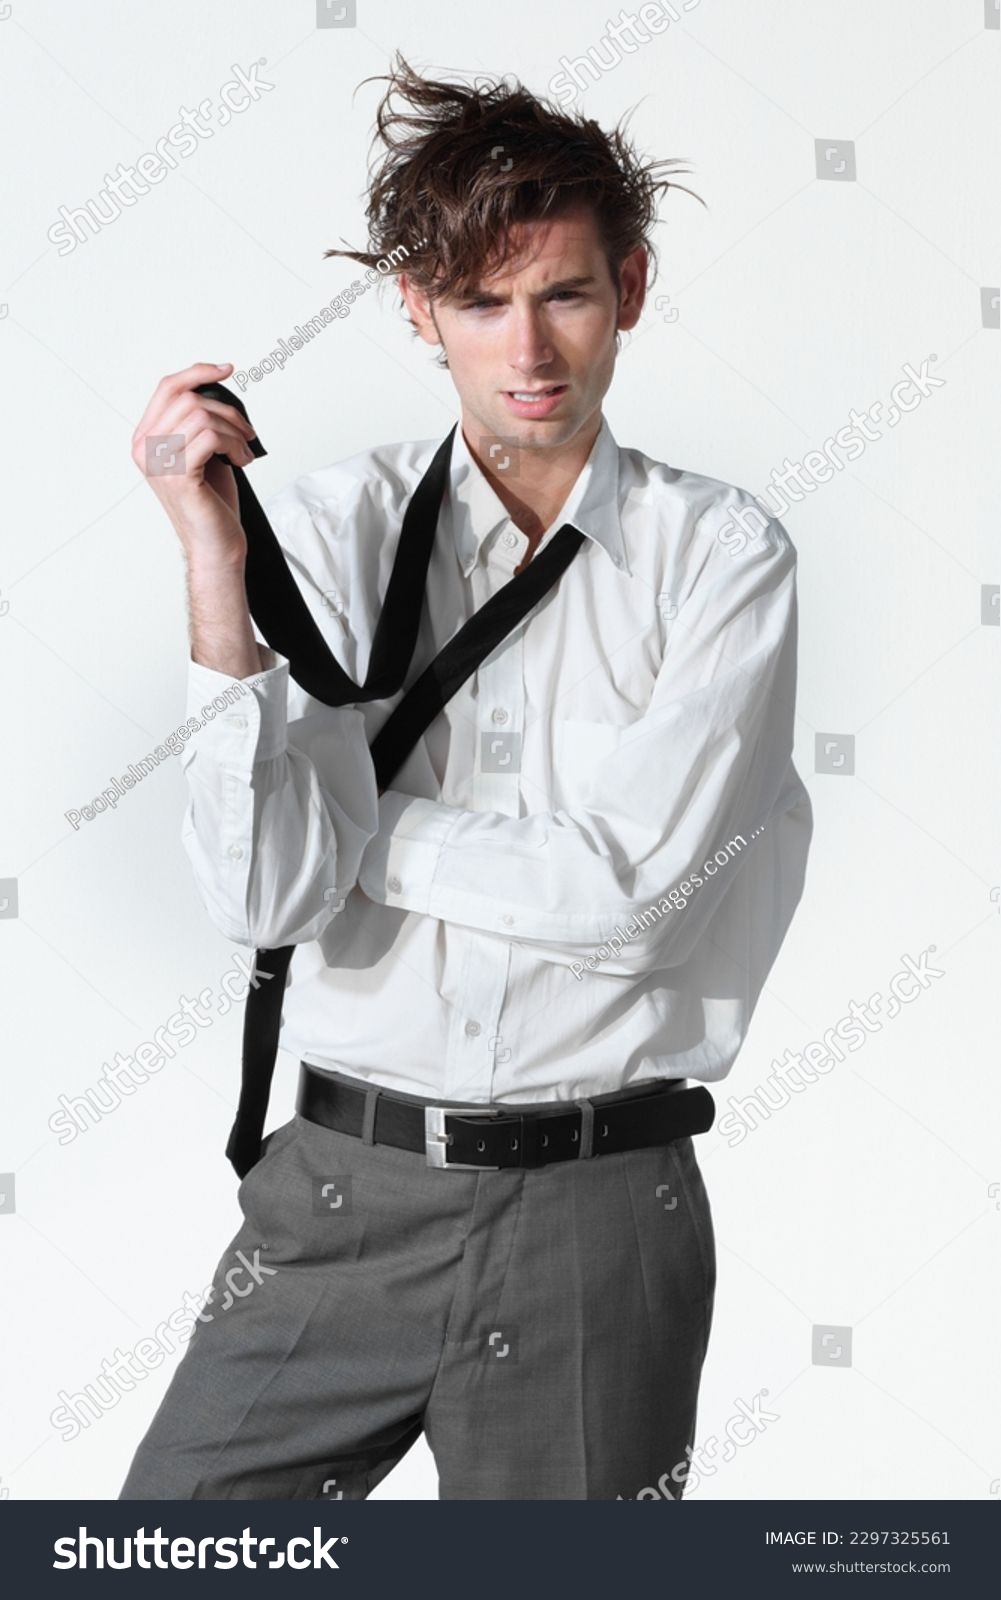 Hes lost his mind. A disheveled young businessman isolated on a white background. #2297325561